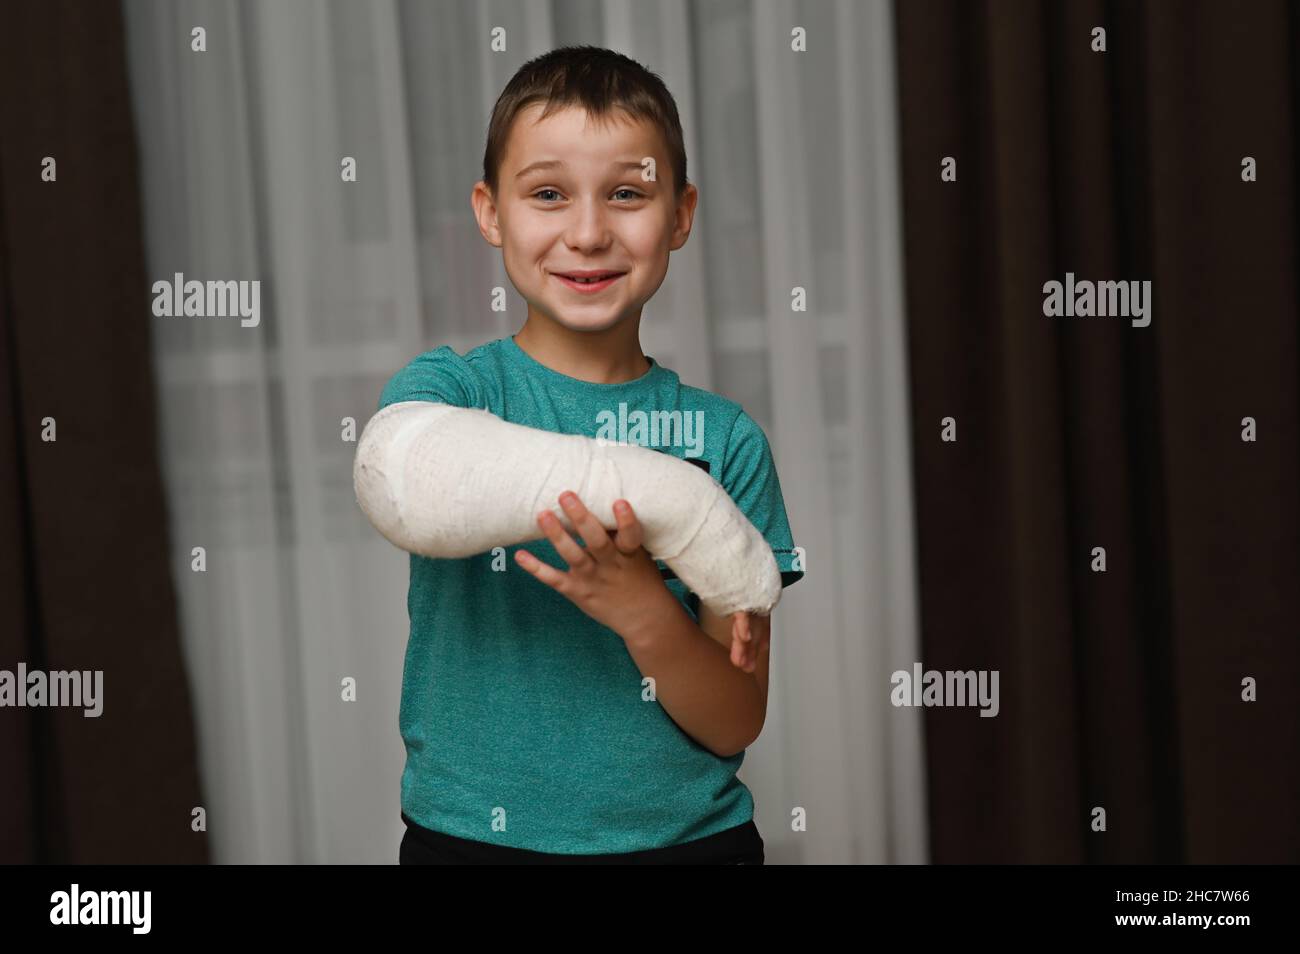 the boy has a cast on his arm and he's smiling. Stock Photo